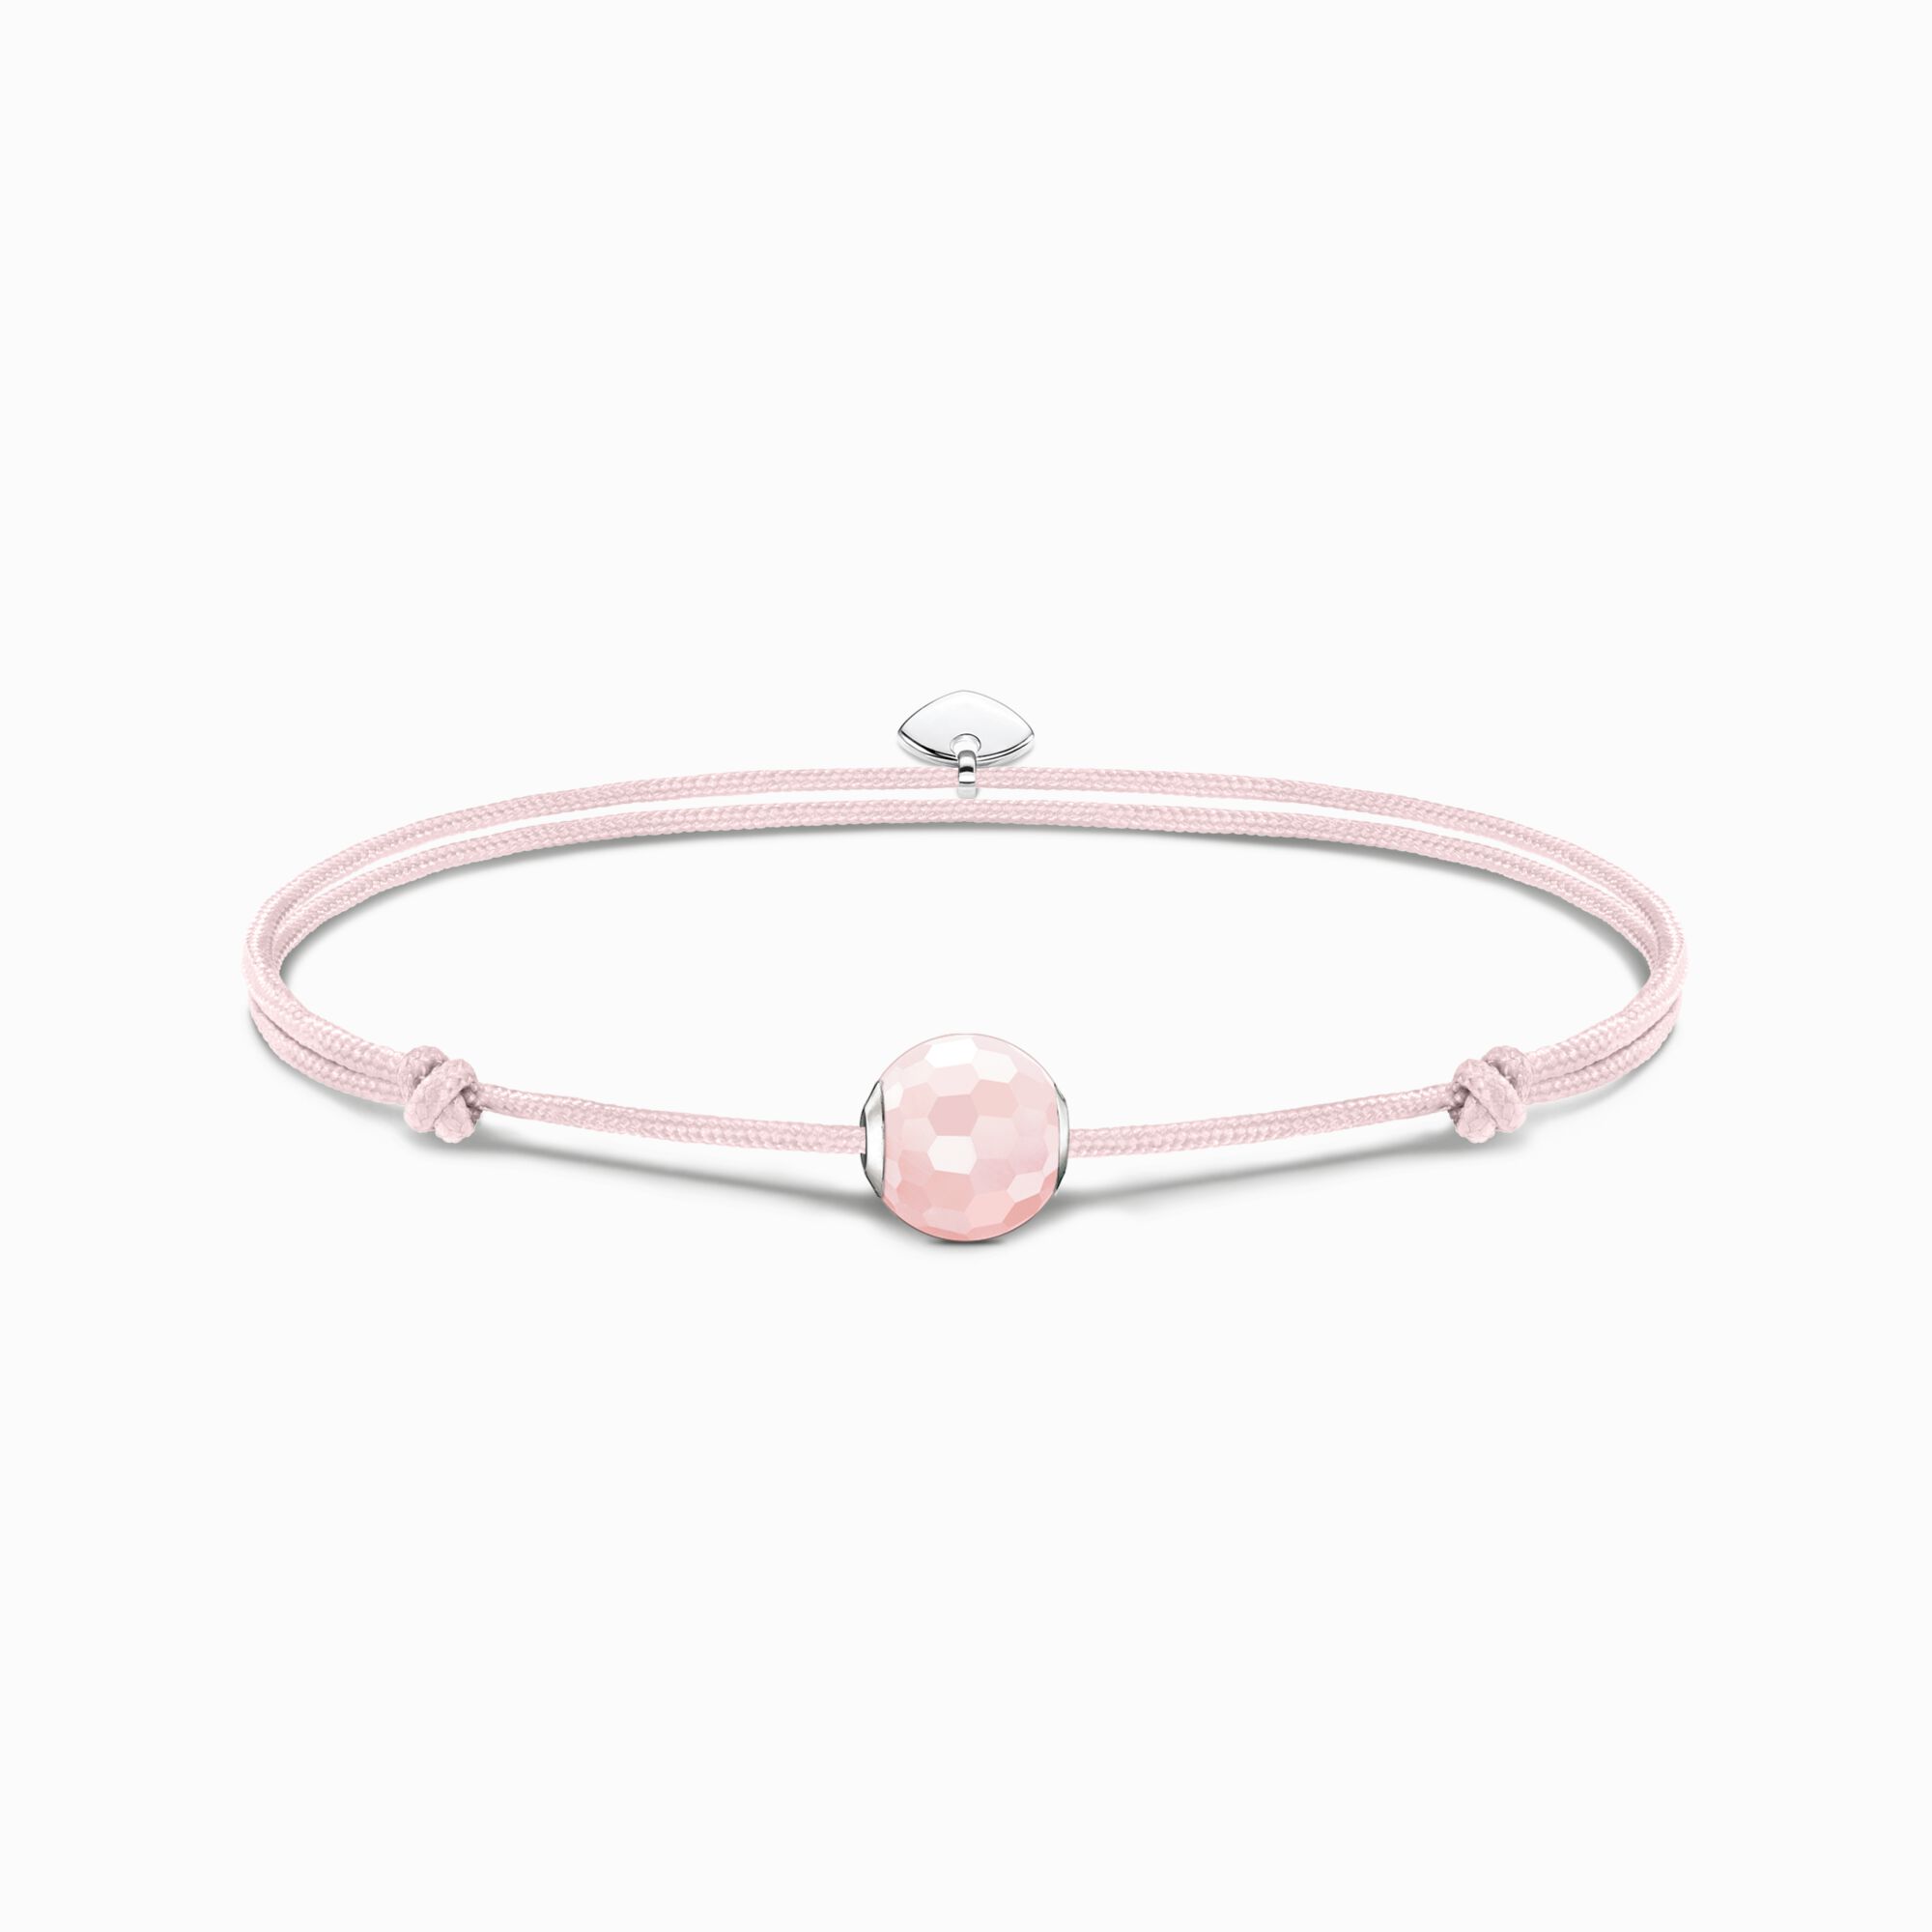 Bracelet Karma Secret with rose quartz Bead from the Karma Beads collection in the THOMAS SABO online store